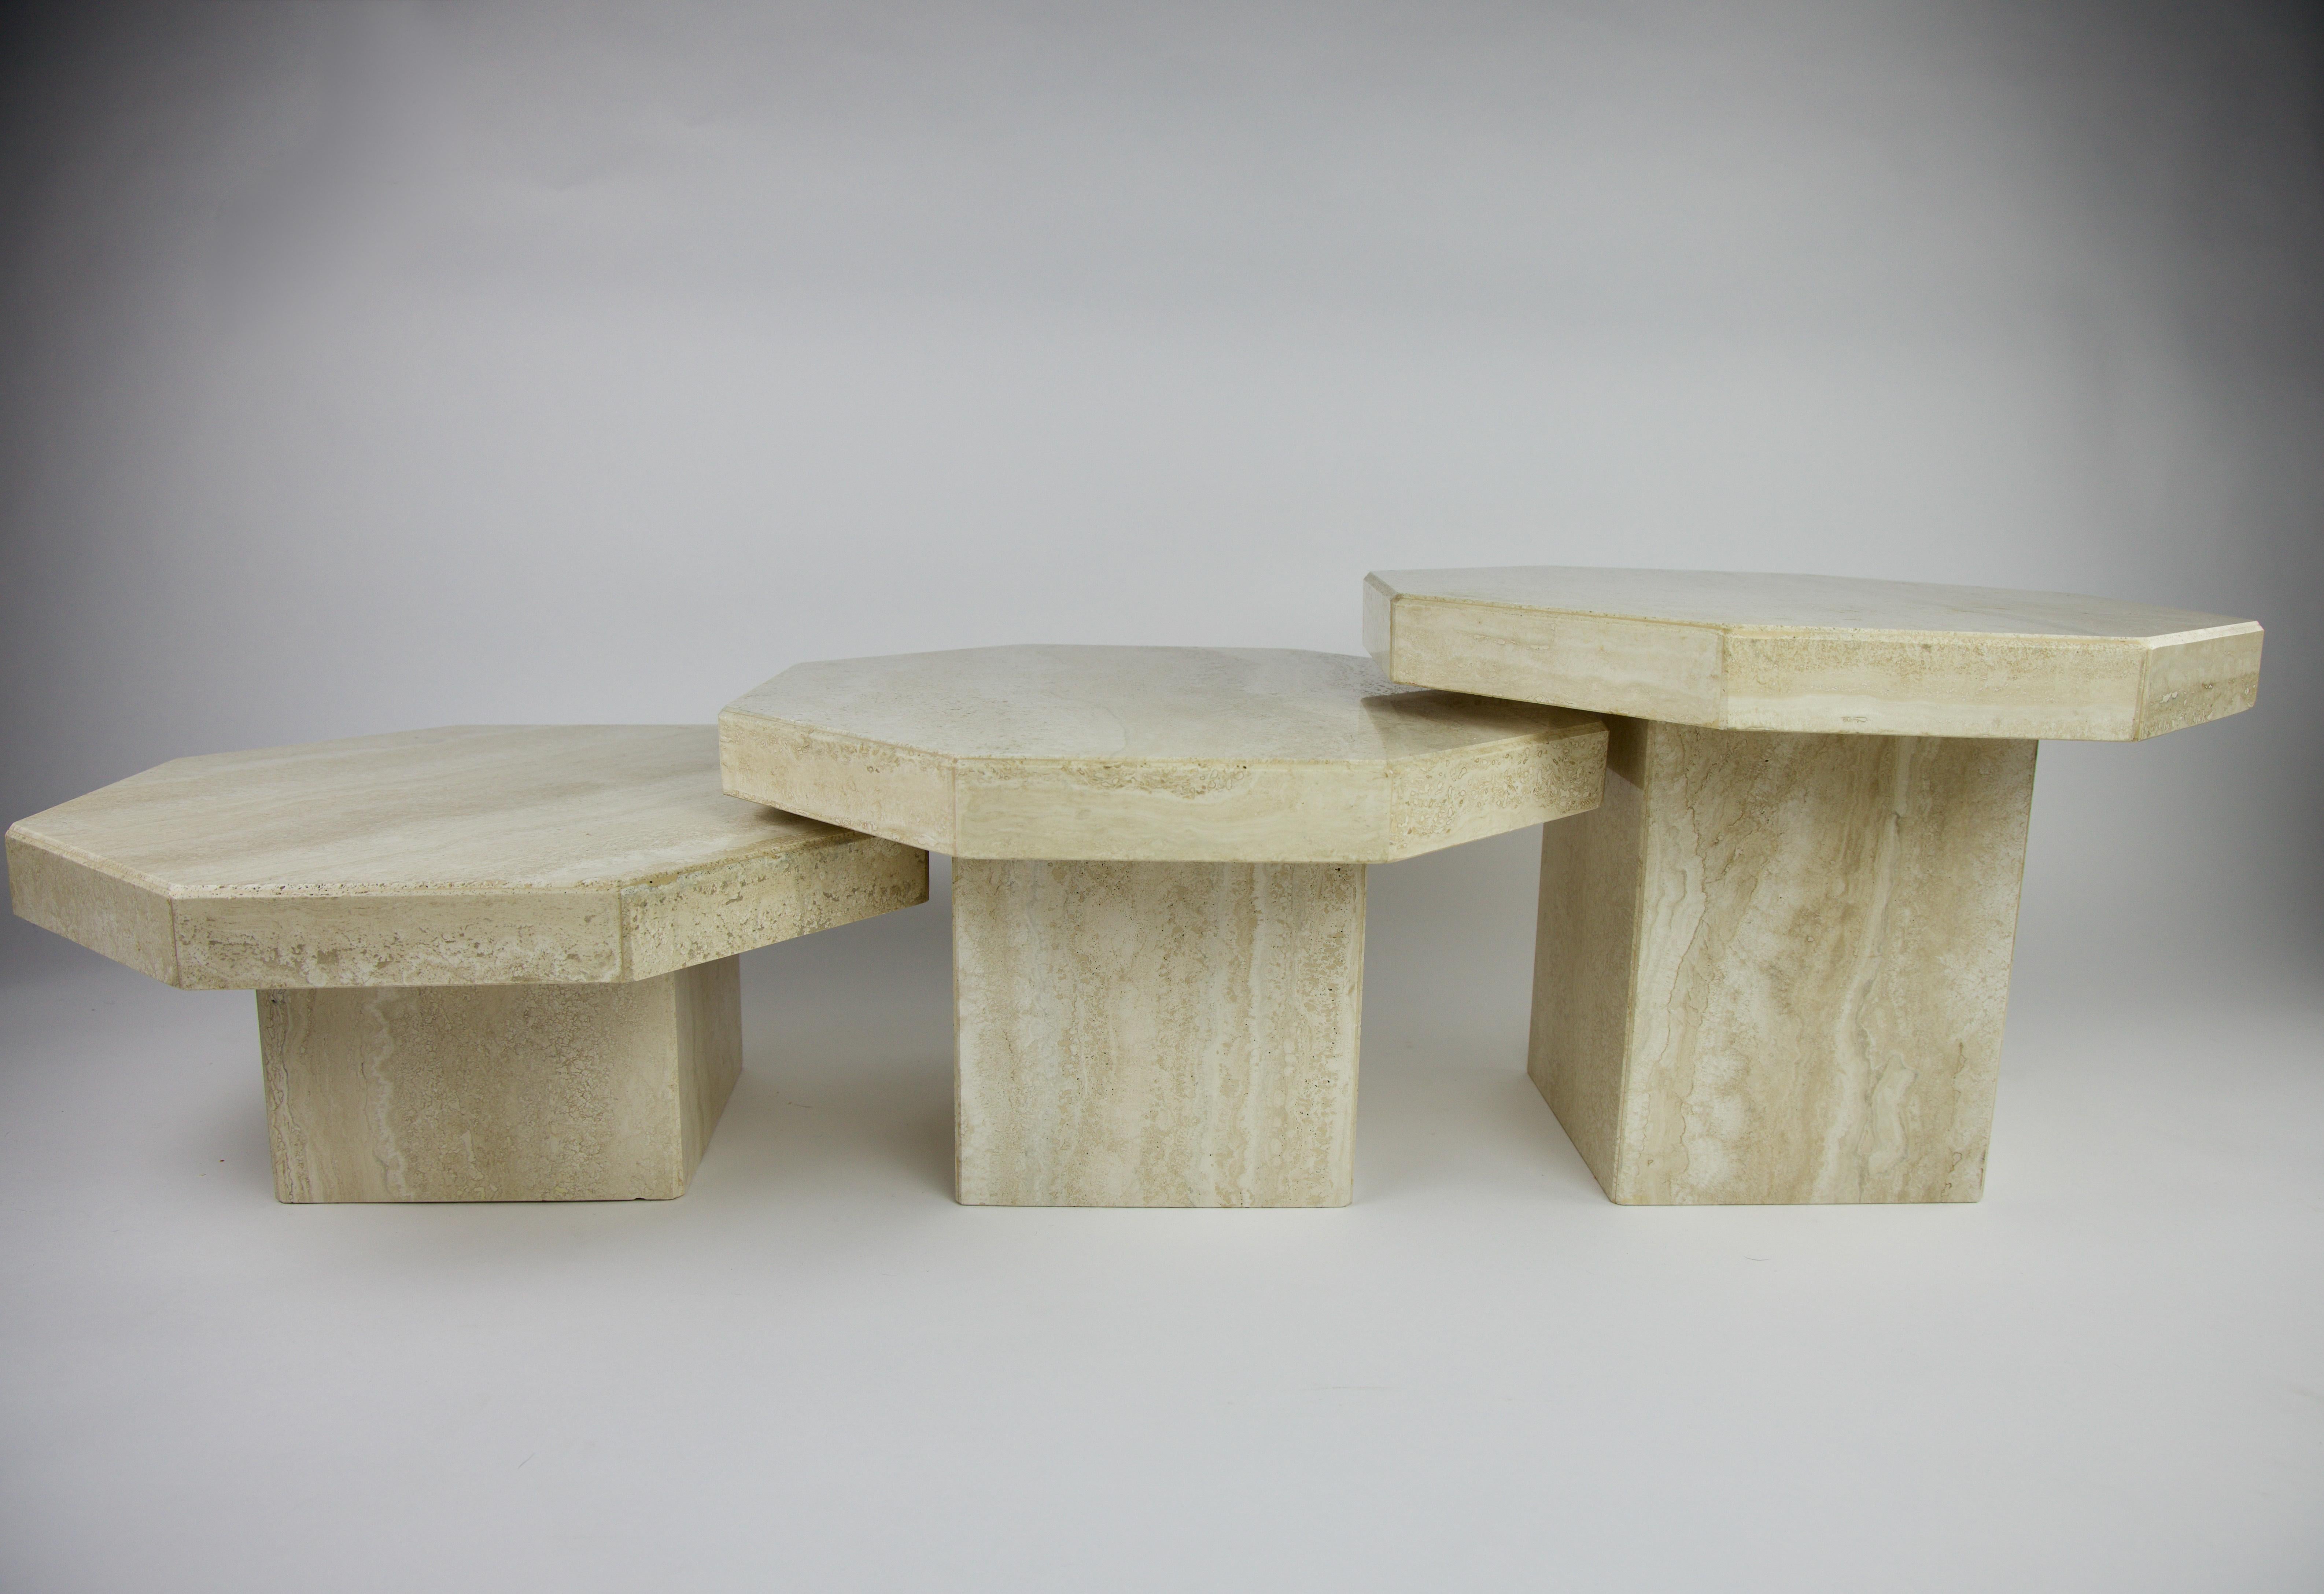 Set of 3 octagon travertine coffee tables in very good condition.

These coffee tables are made from solid travertine.

They have different heights so they can be combined in many different ways.
-20.5